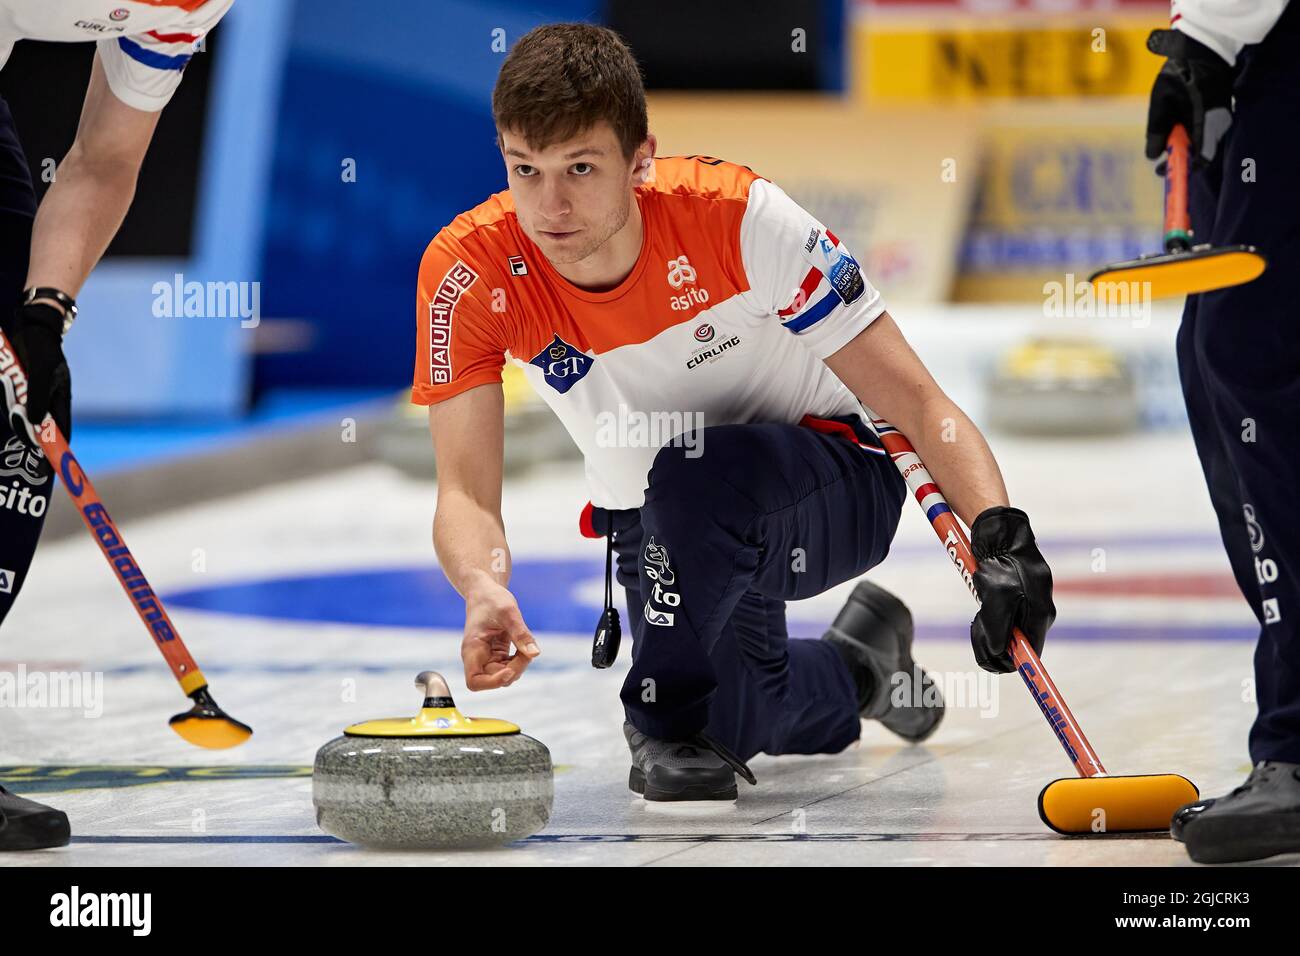 Carlo Glasbergen, the Netherlands, during the Le Gruyére AOP European  Curling Championships 2019 at Olympiahallen in Helsingborg, Sweden on  November 16, 2019. Photo: Anders Bjuro / TT / code 11830 Stock Photo - Alamy